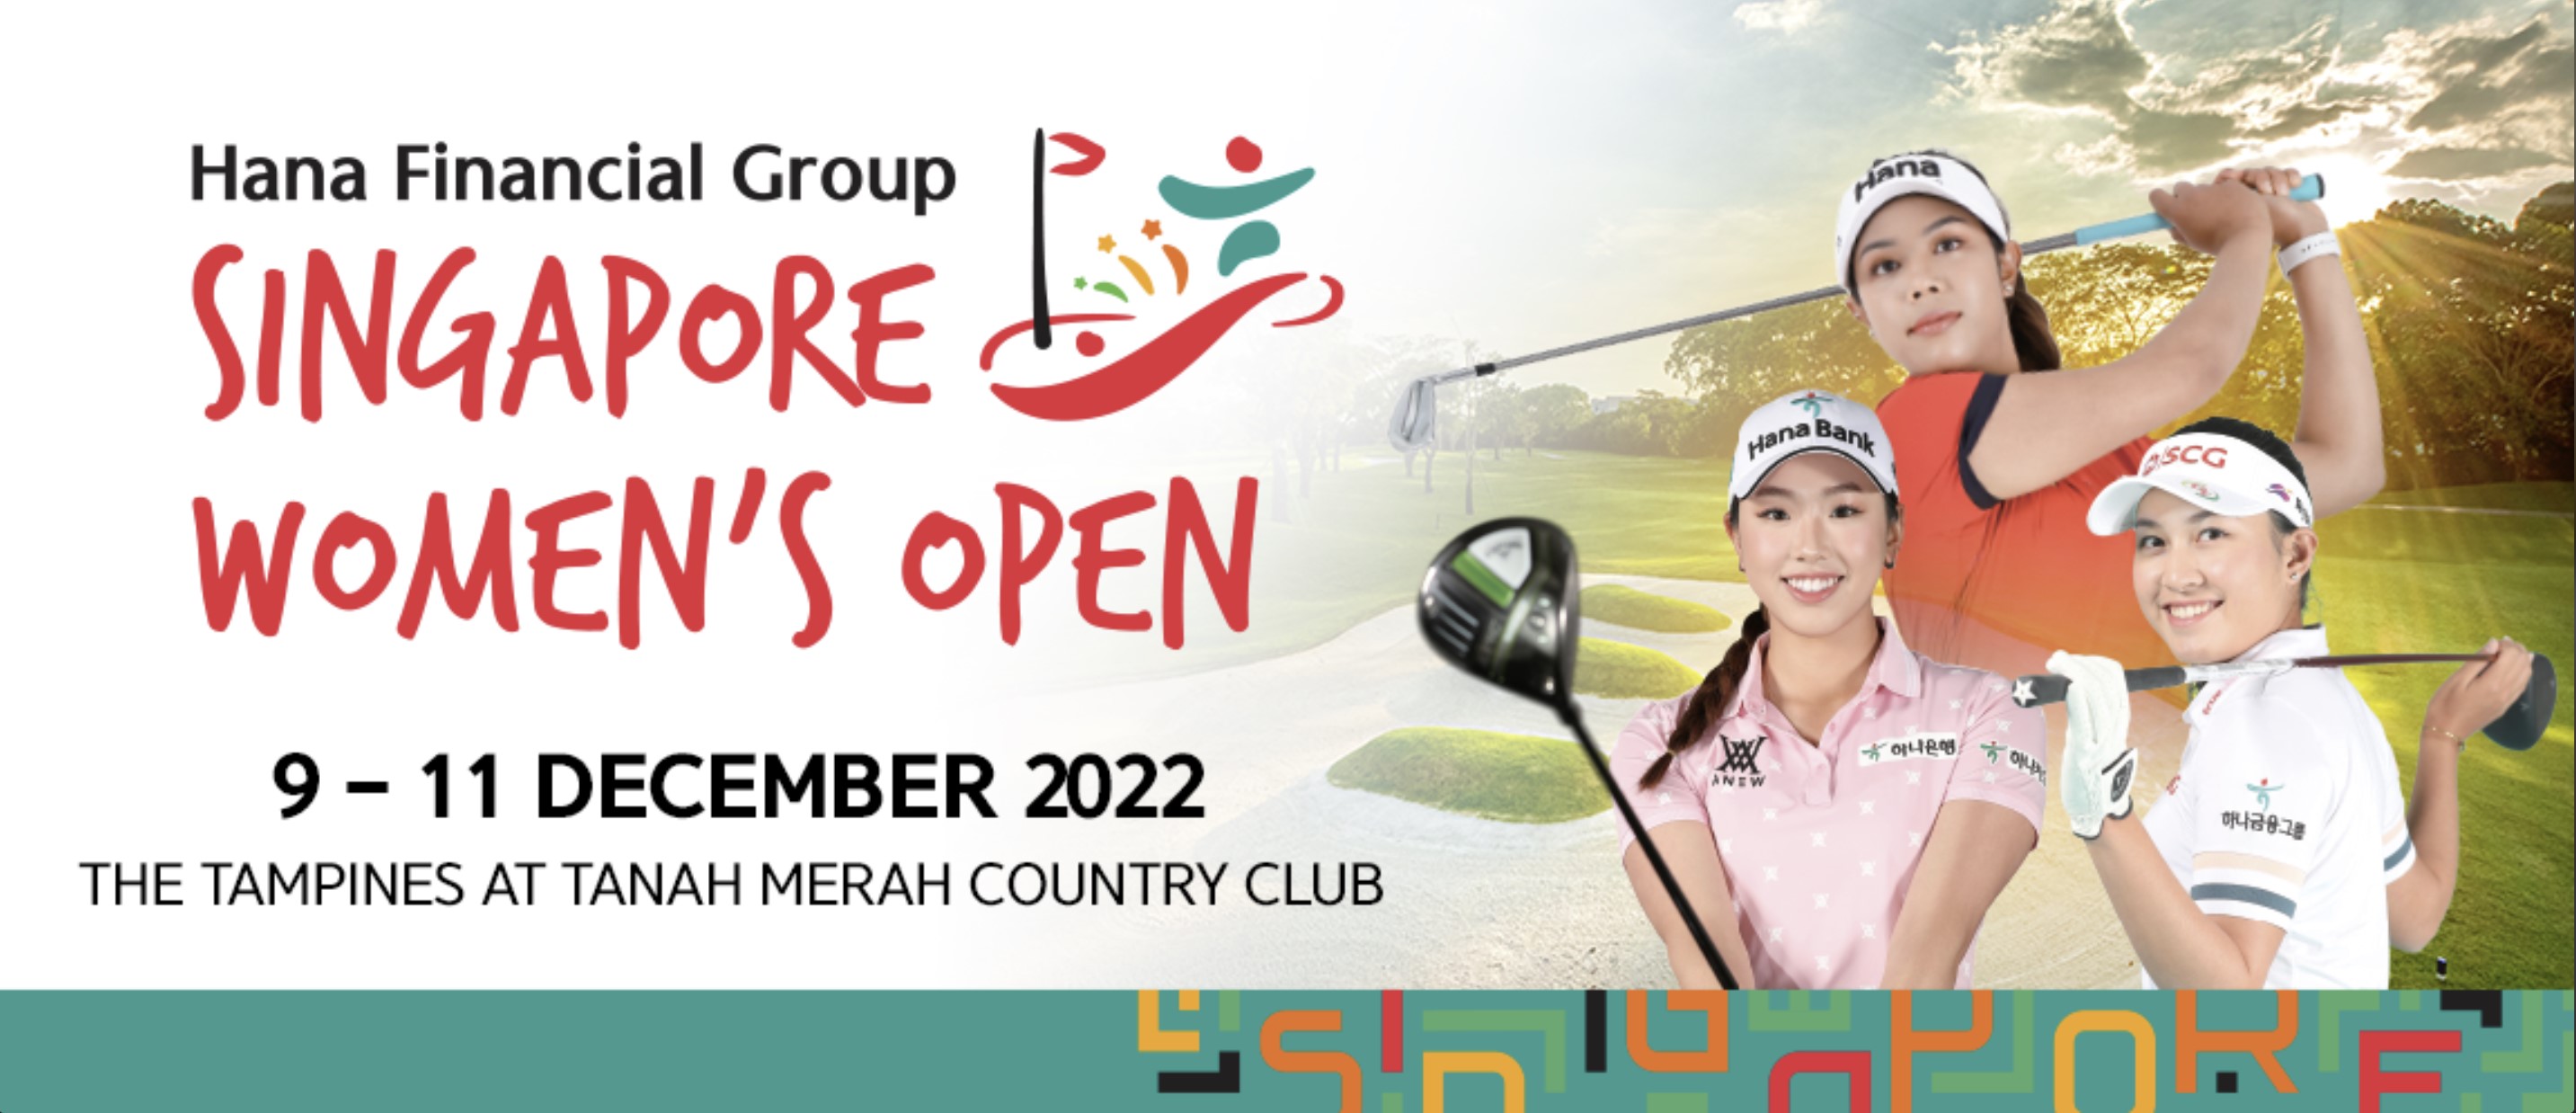 World number 3 Atthaya Thitikul Leads the Field at upcoming Singapore Women's Open!